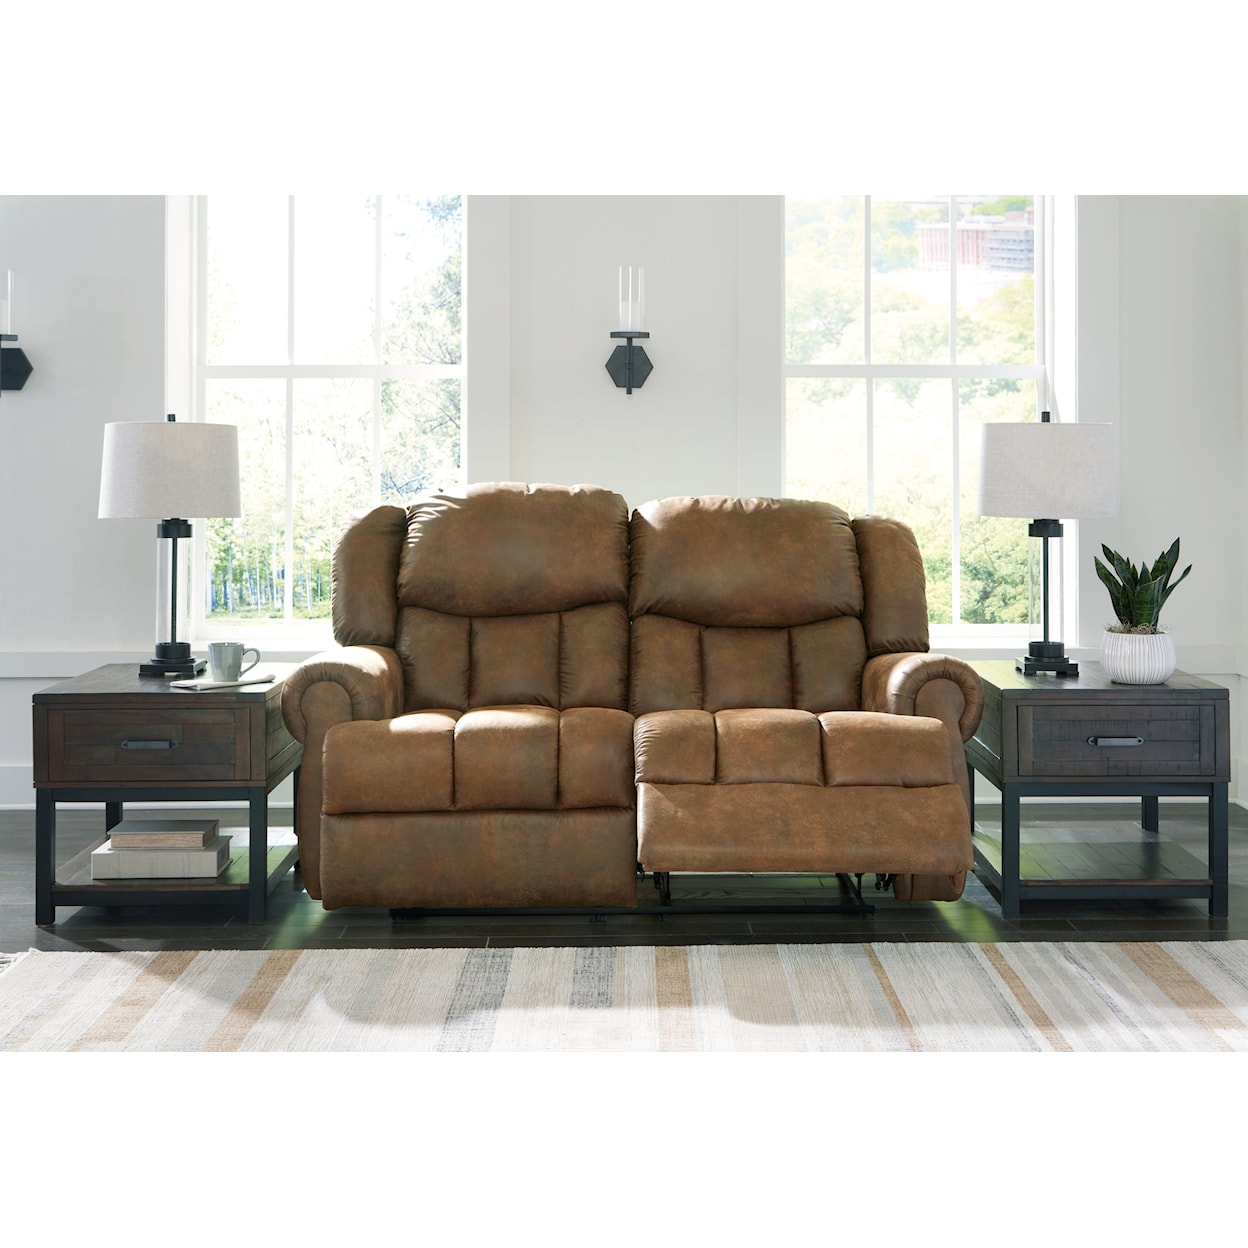 Signature Design by Ashley Boothbay Reclining Loveseat